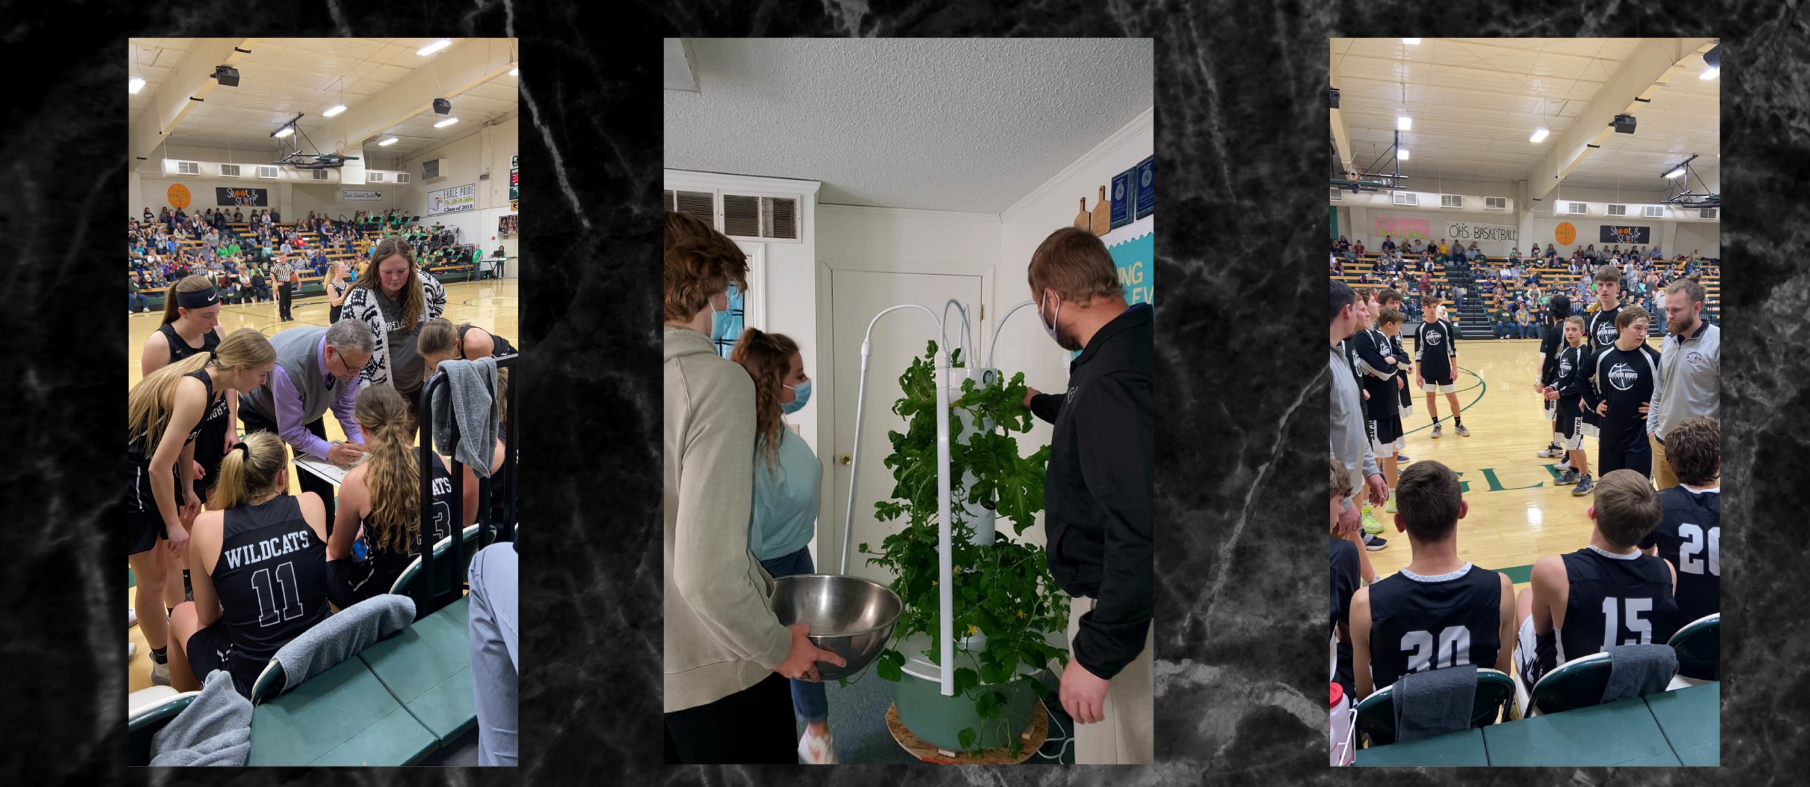 Collage of high schoo hydroponics lab, students playing basketball